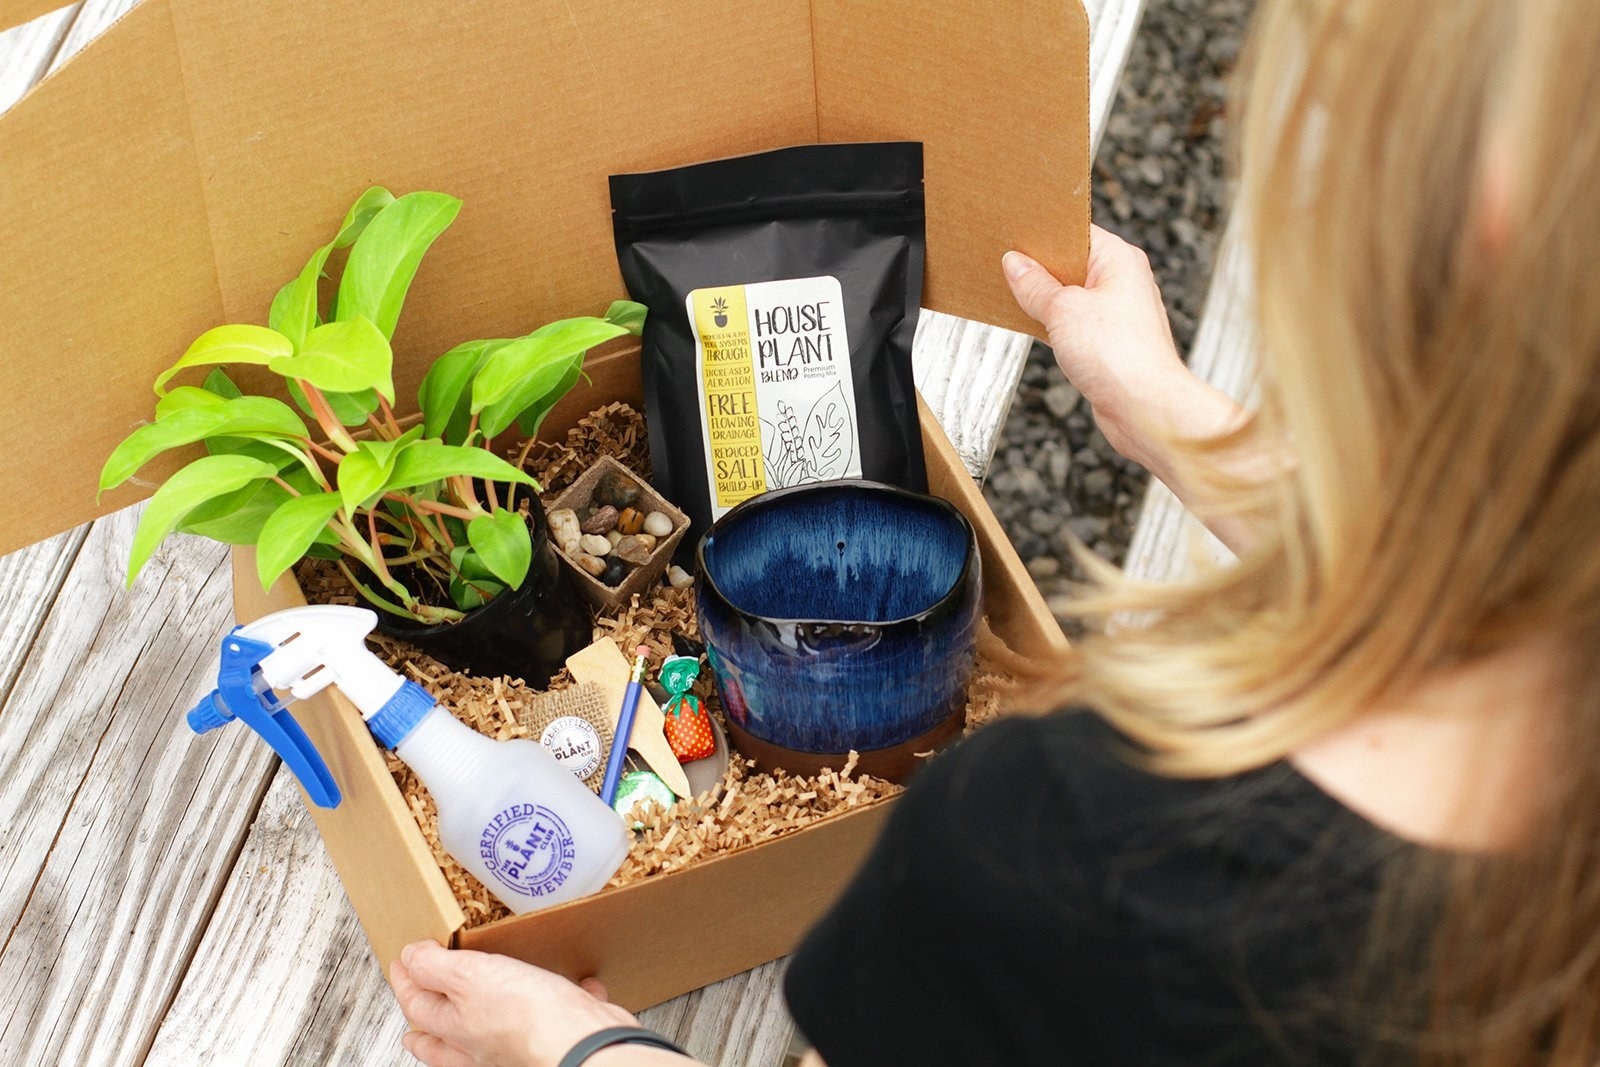 A person opening up a box with a plant, water bottle, pot, and other plant-related products inside